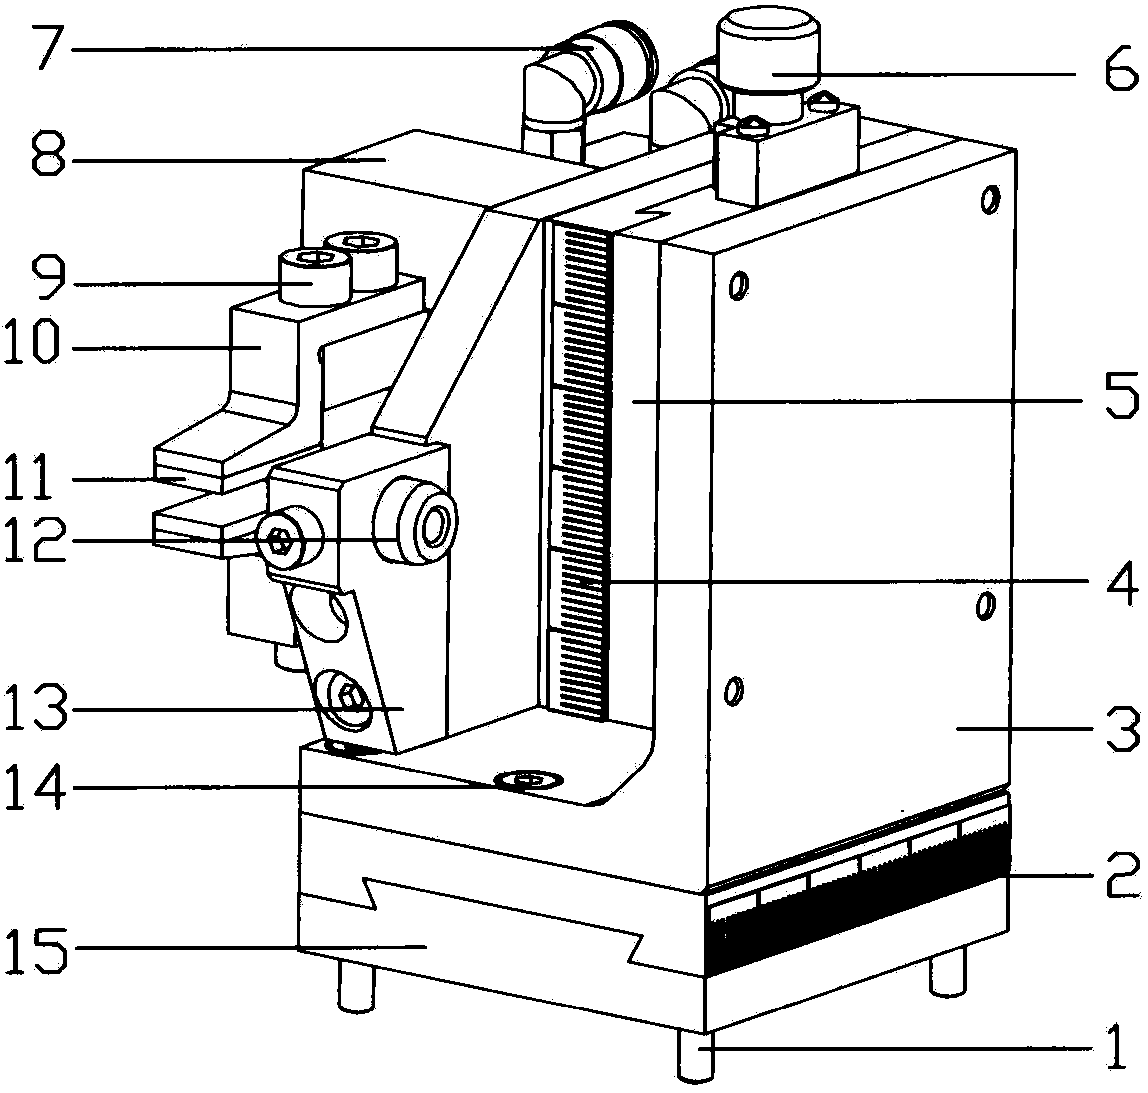 Long and thin cutter support device